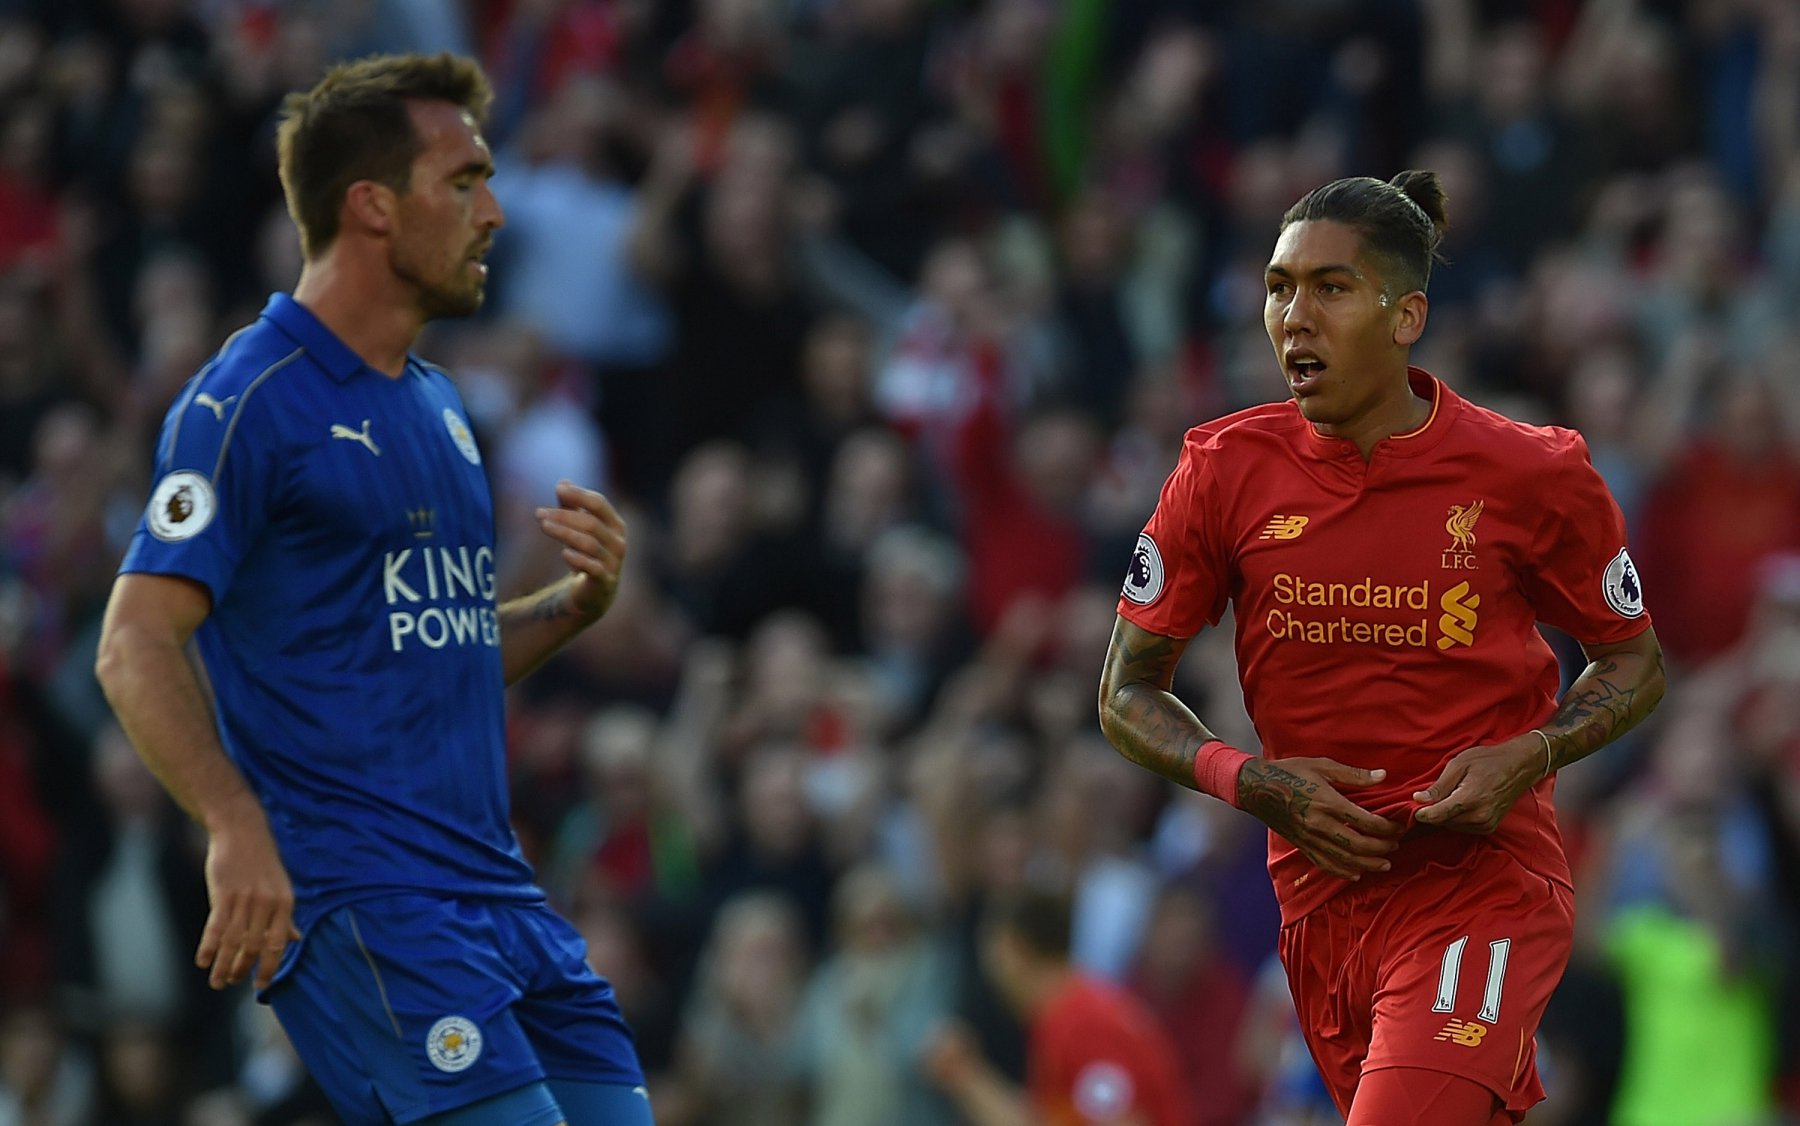 Liverpool 4-1 Leicester – Player Ratings: Sturridge and Firmino shine in fantastic team performance